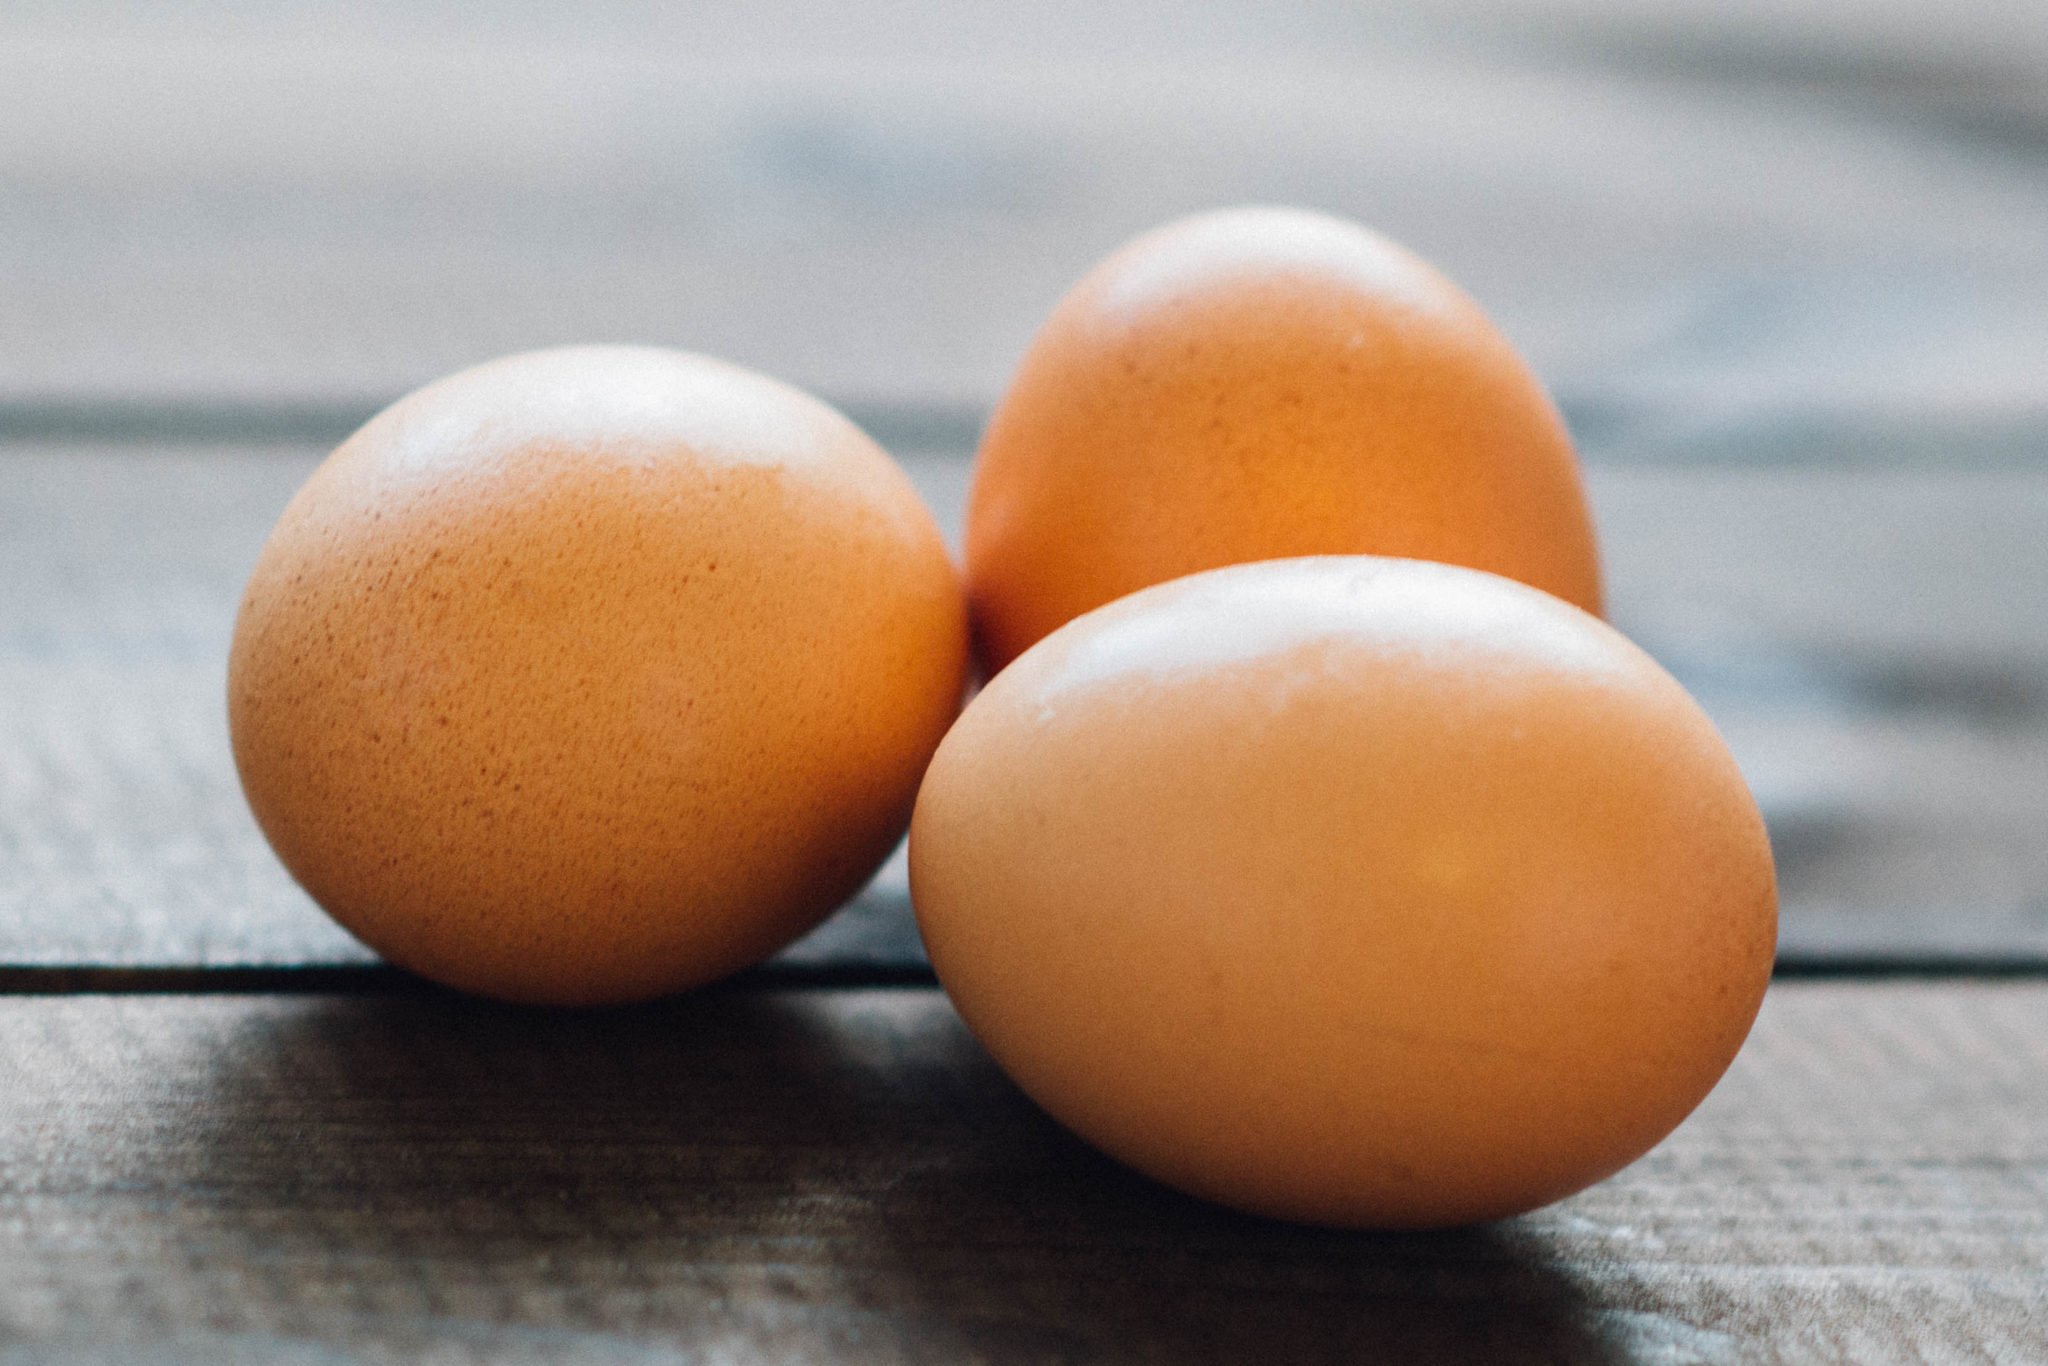 Are You Buying the Right Type of Eggs?